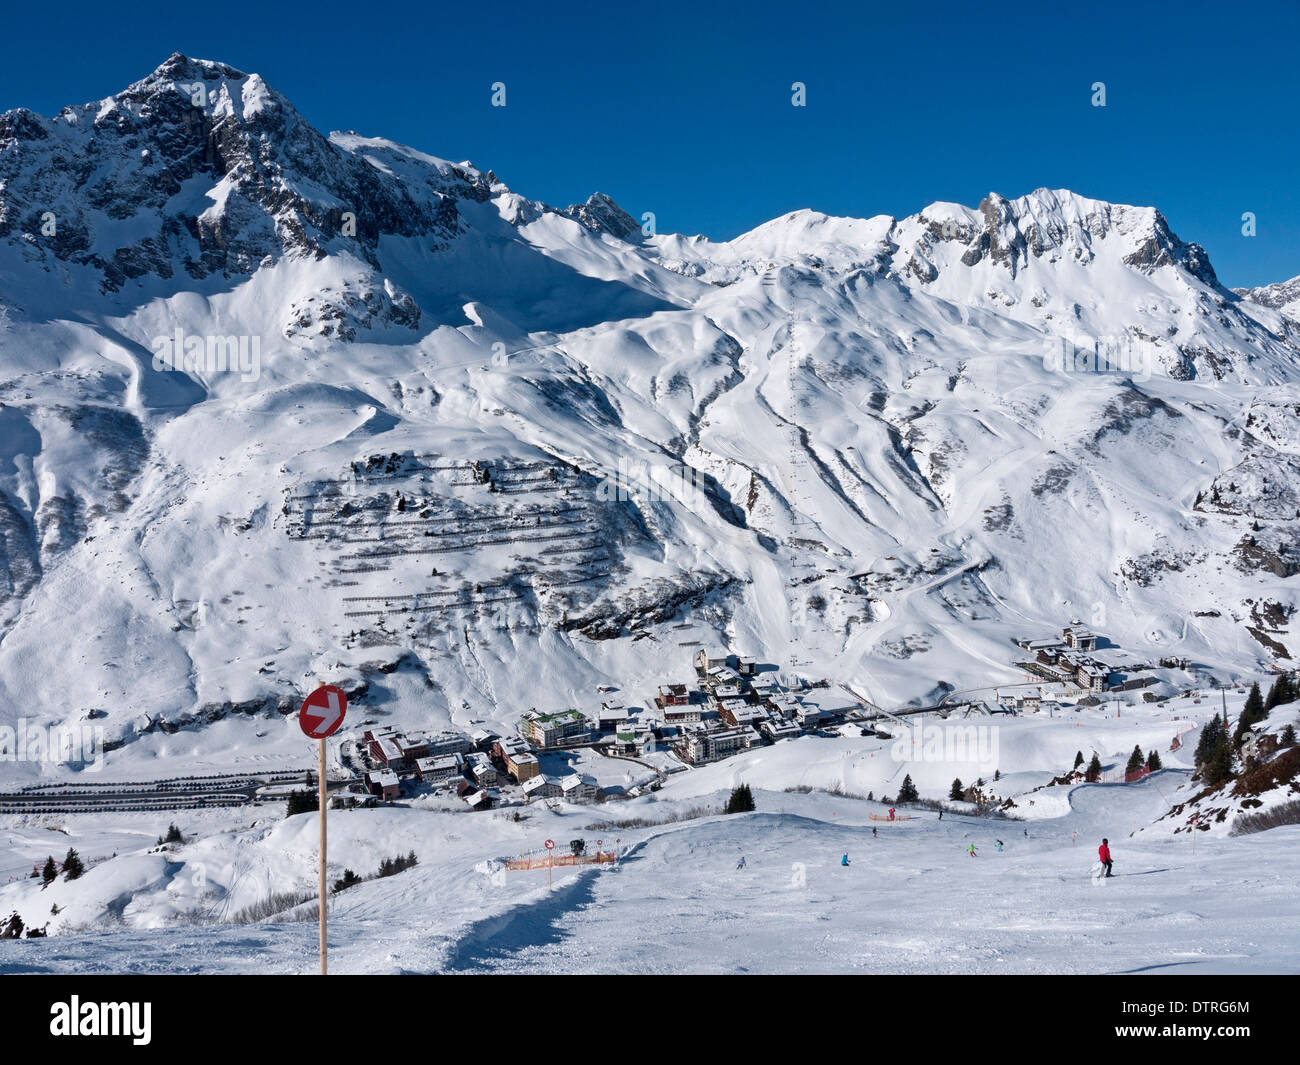 Ski run from Lech down to Zurs, part of the White Ring Circuit which also links Zug and Oberlech. Stock Photo